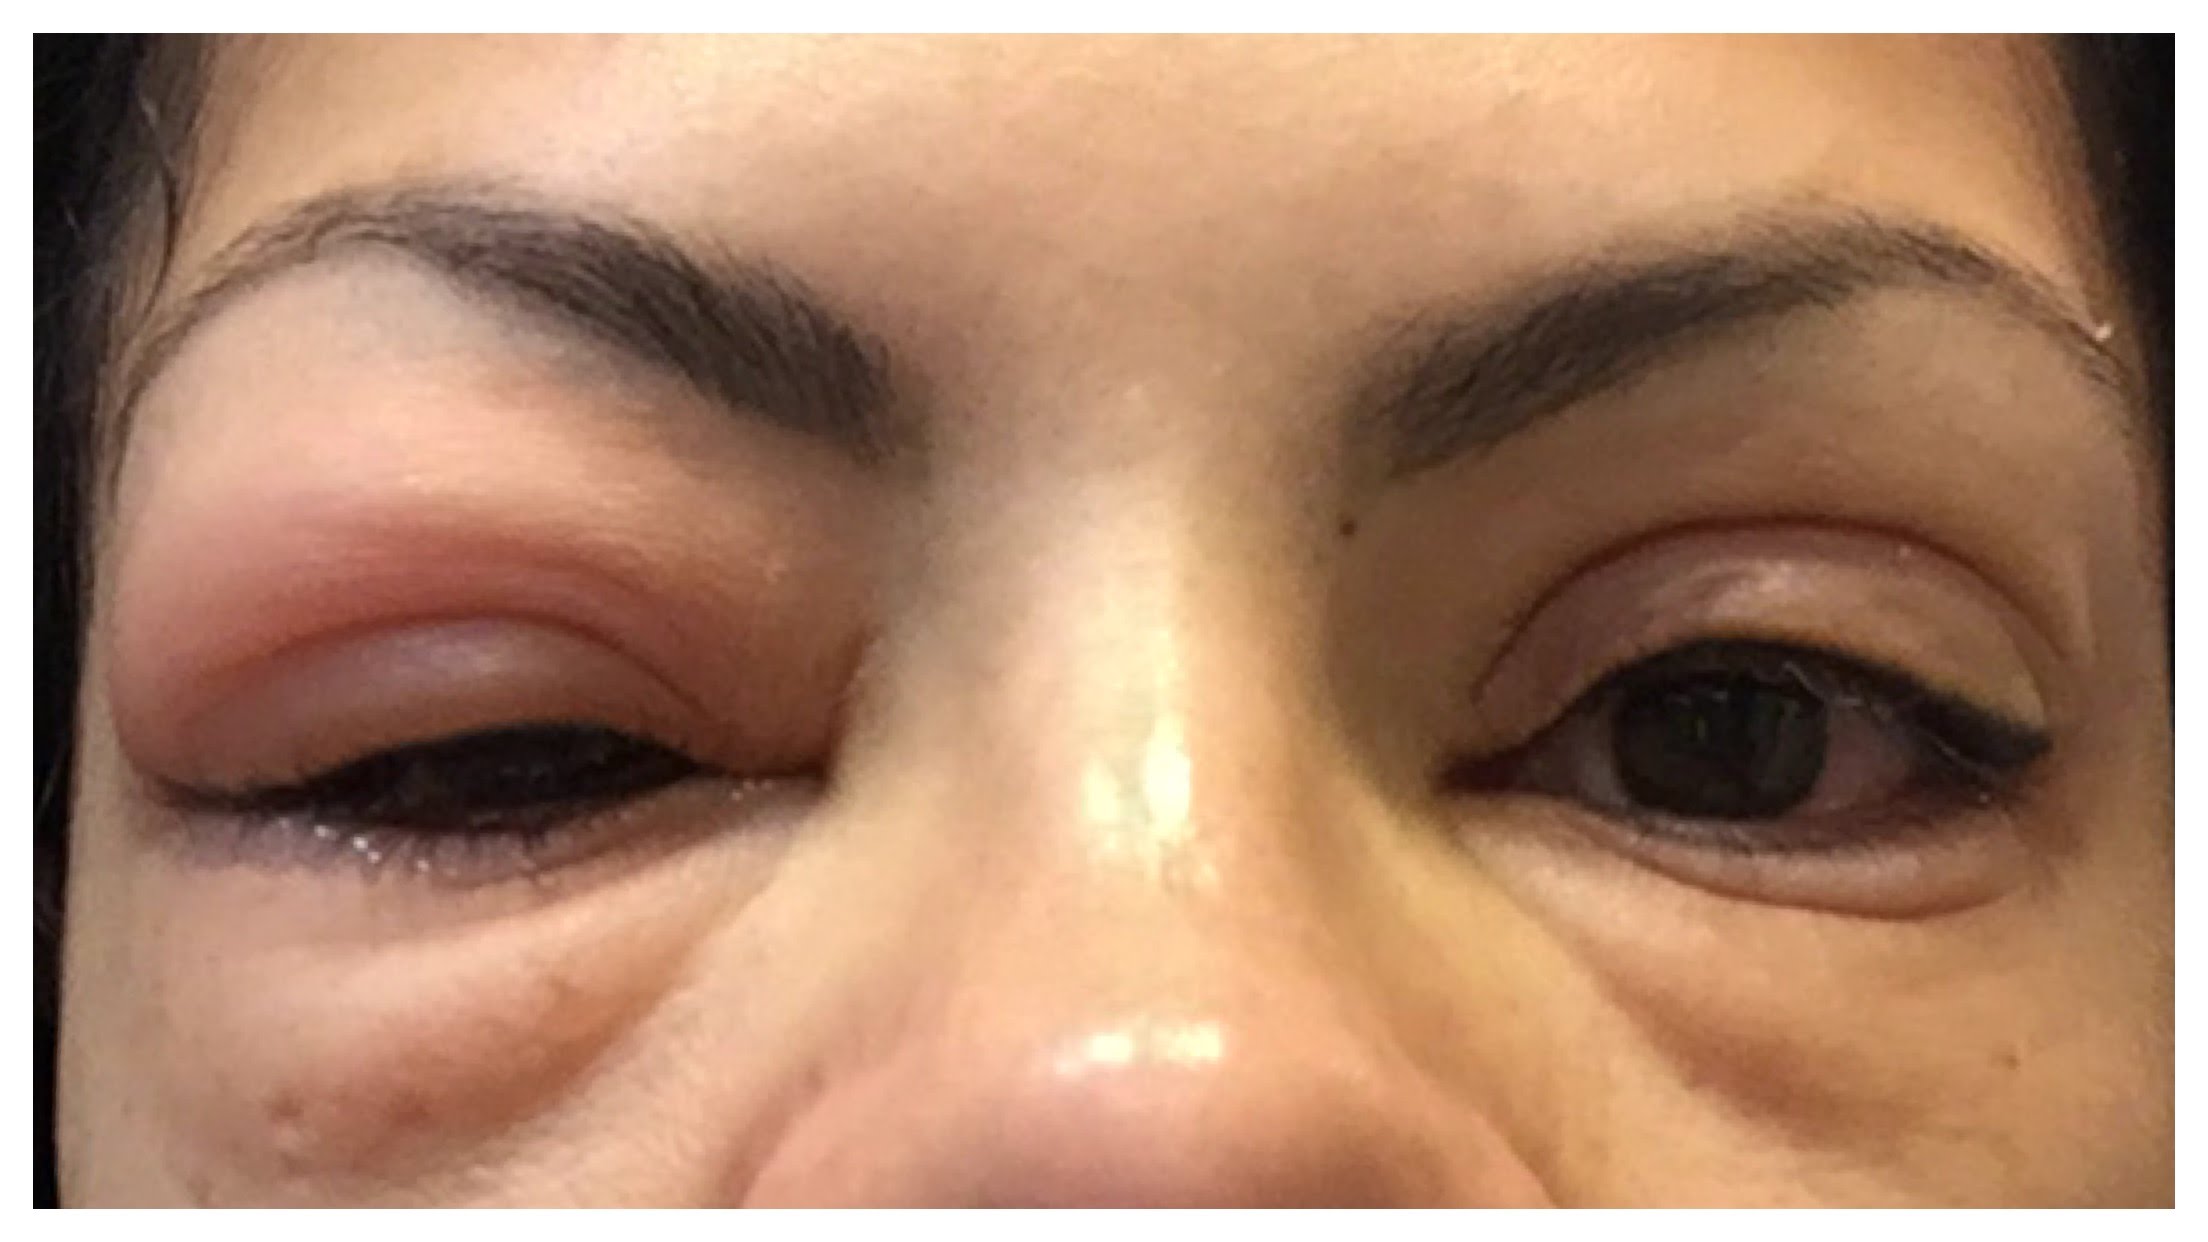 eyelashes false extensions infection effects side eyes swollen eyelids due eyelash remove makeup serious